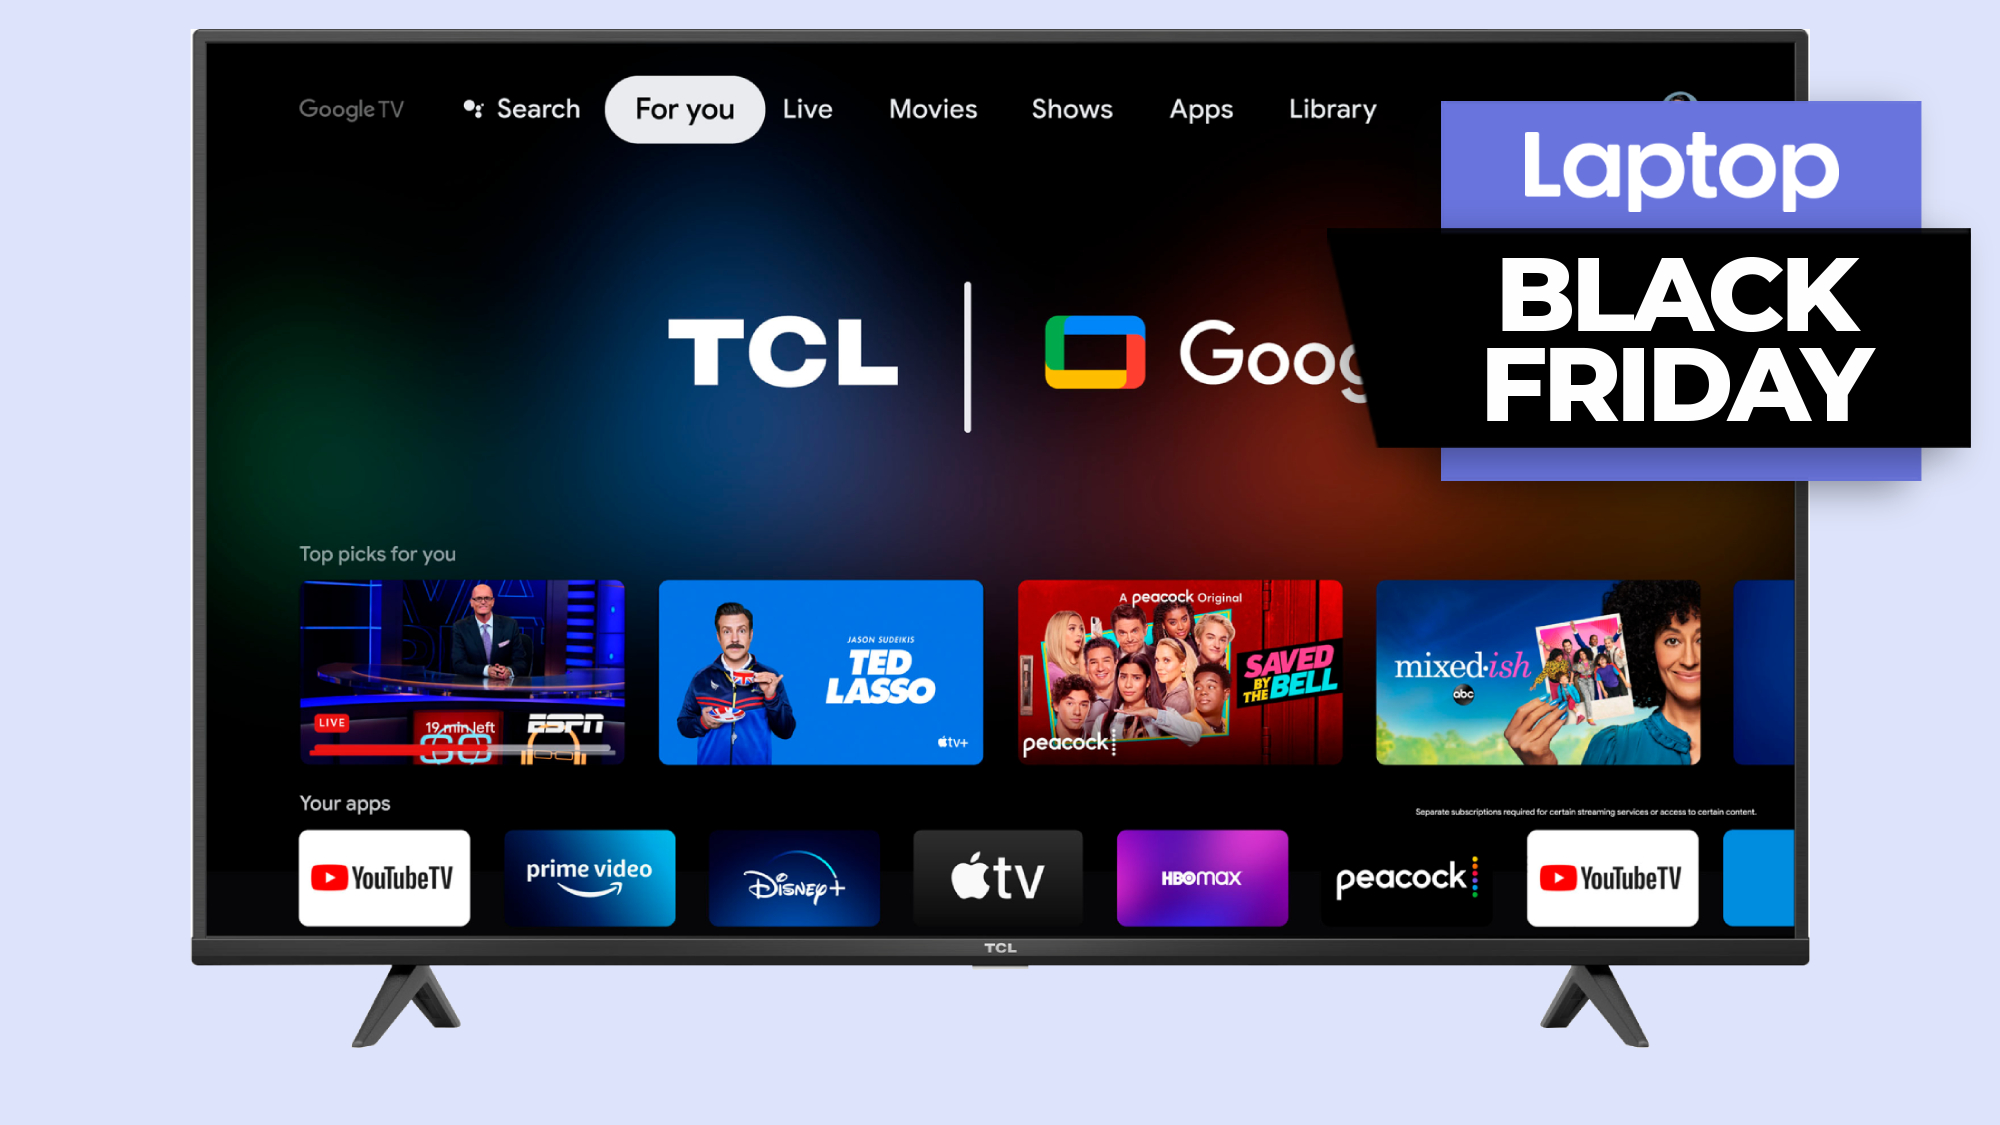 This TCL 65 inch TV is only 399 in Black Friday deal — get it before